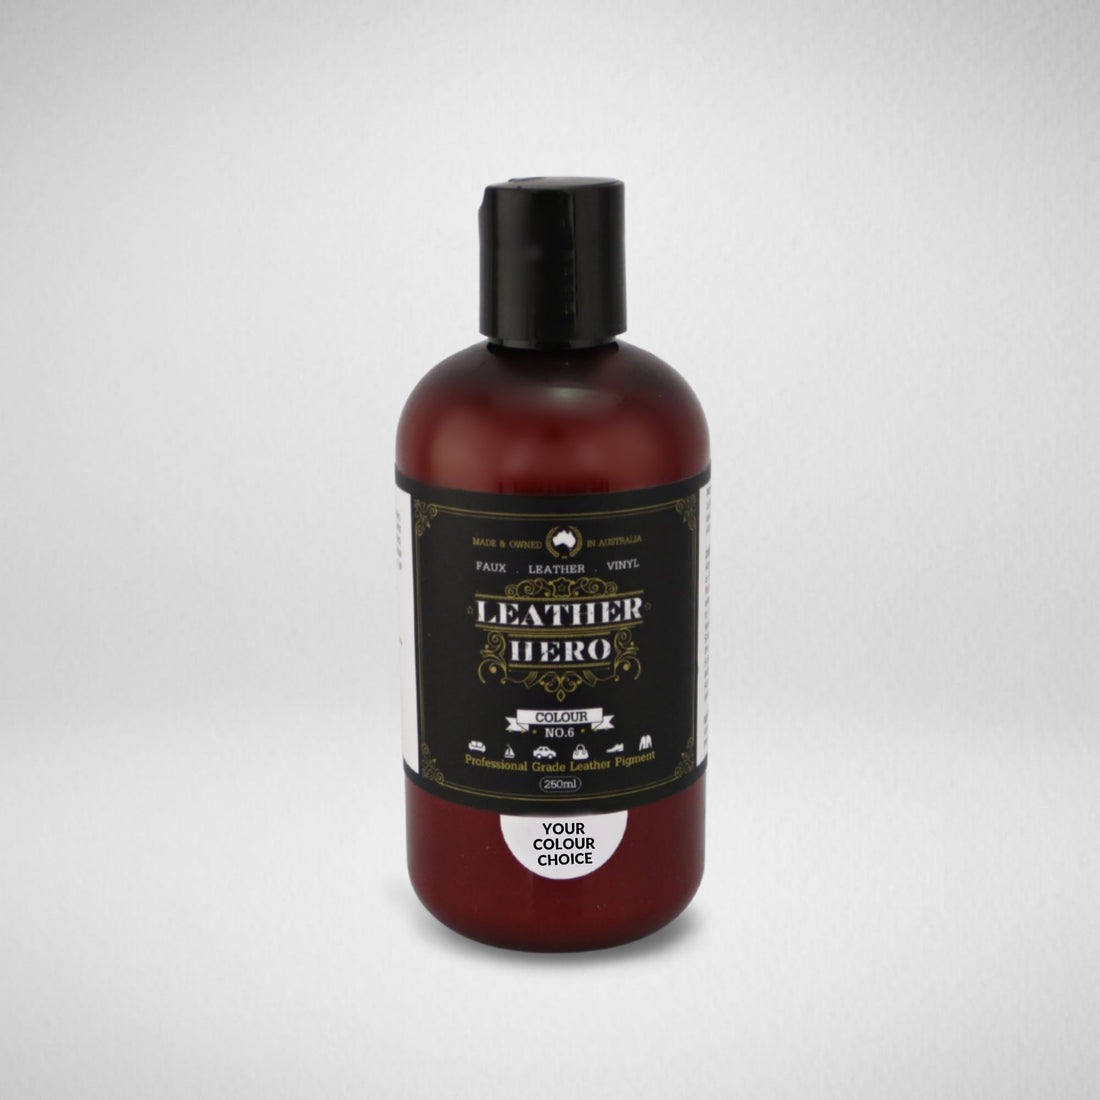 Leather Paint - Lavender Grey Leather Repair & Recolouring Leather Hero Australia